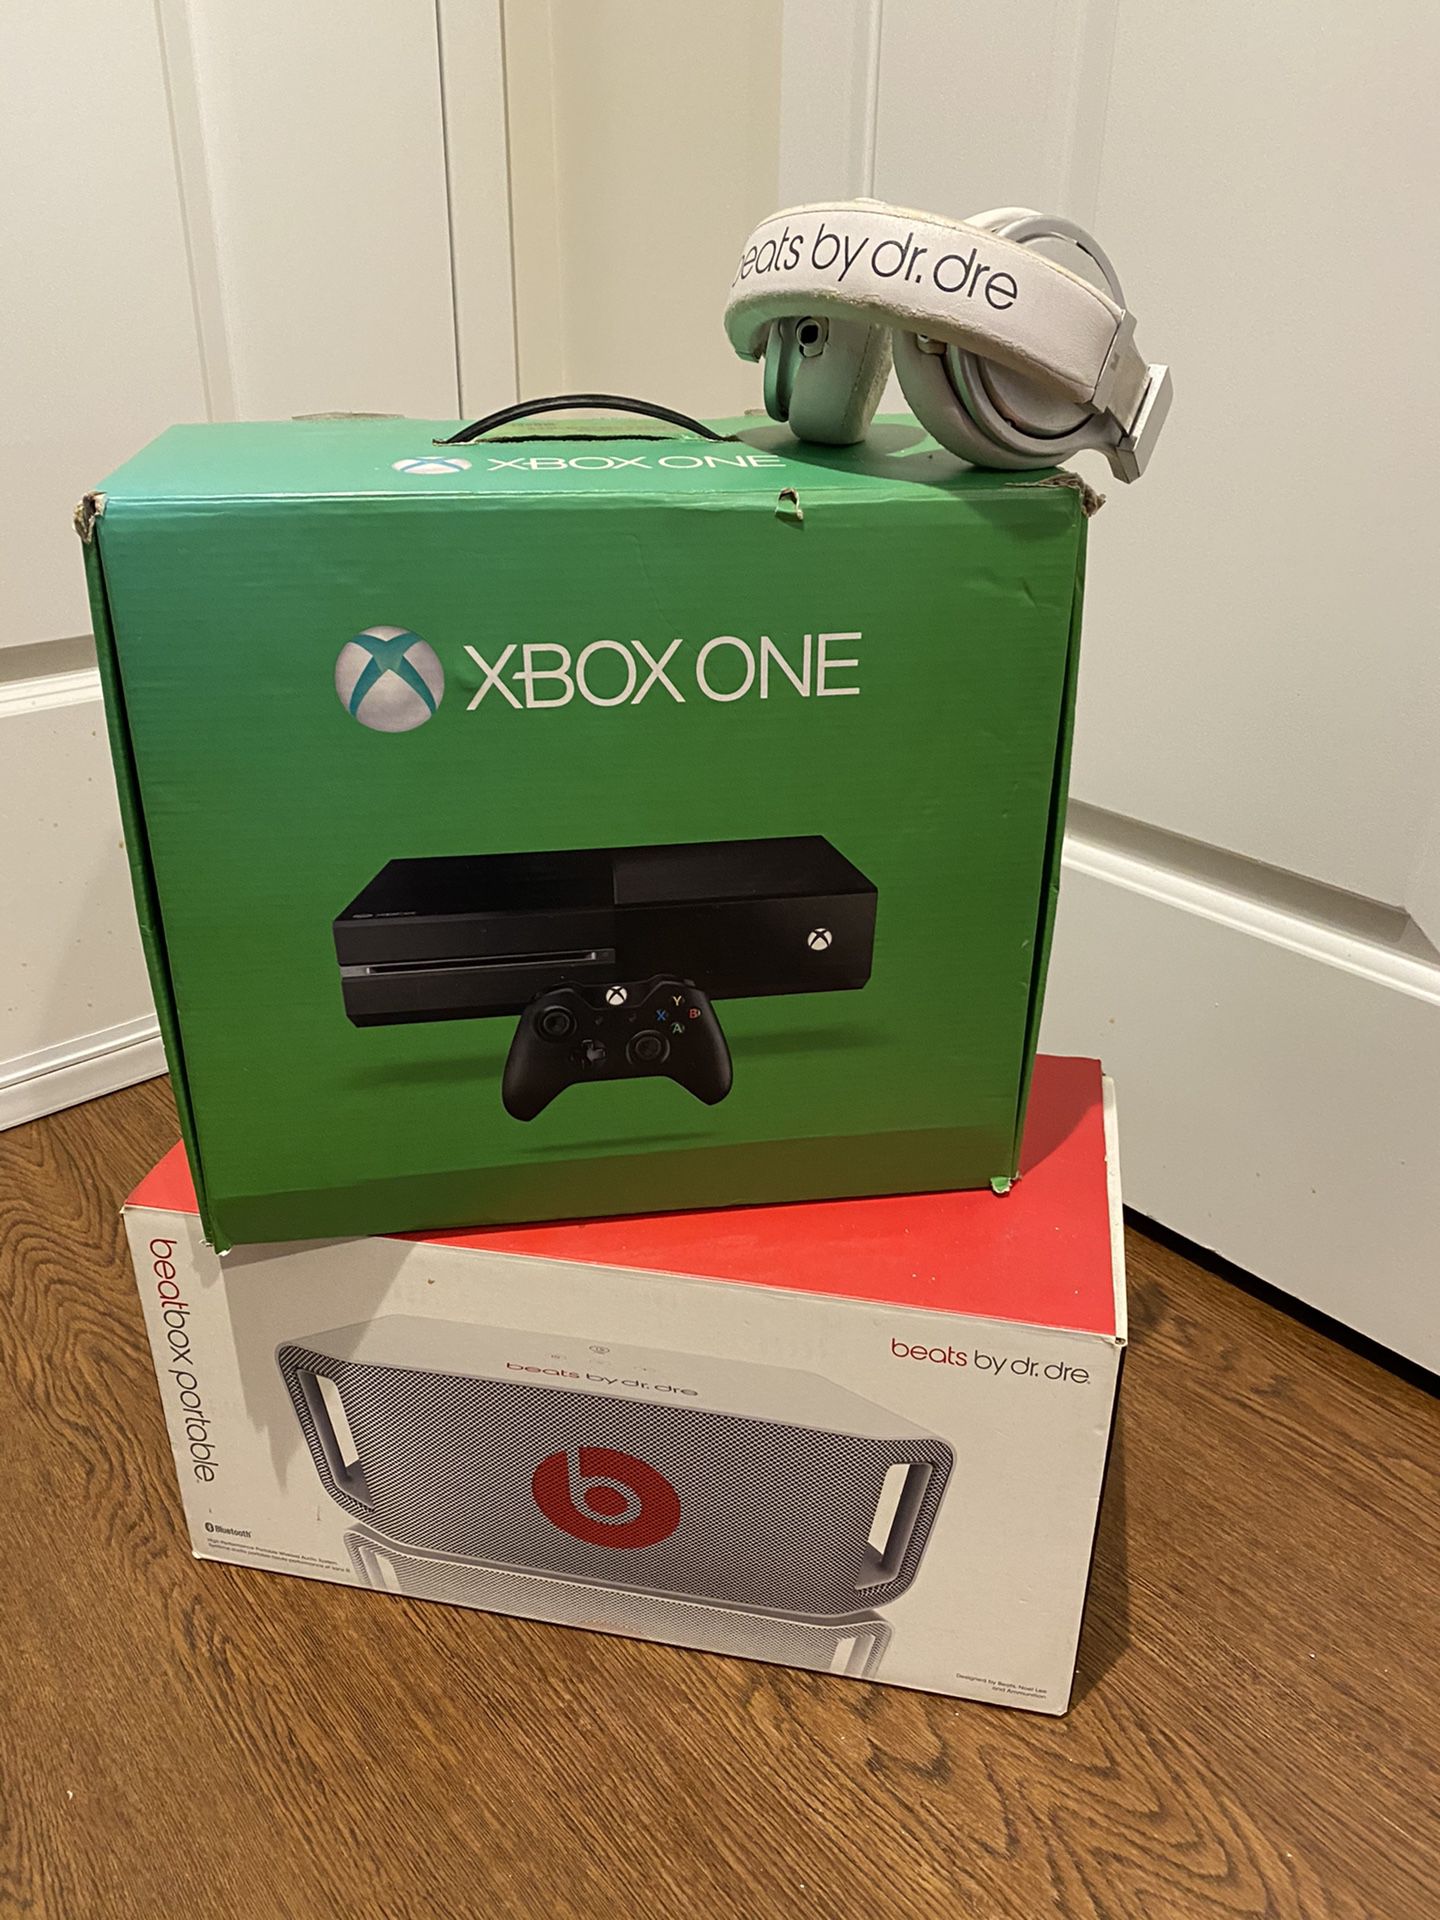 FRIDAY SPECIAL!! Get your Xbox 1, Beatbox Portable, and Beats by Dre Headphones Today!